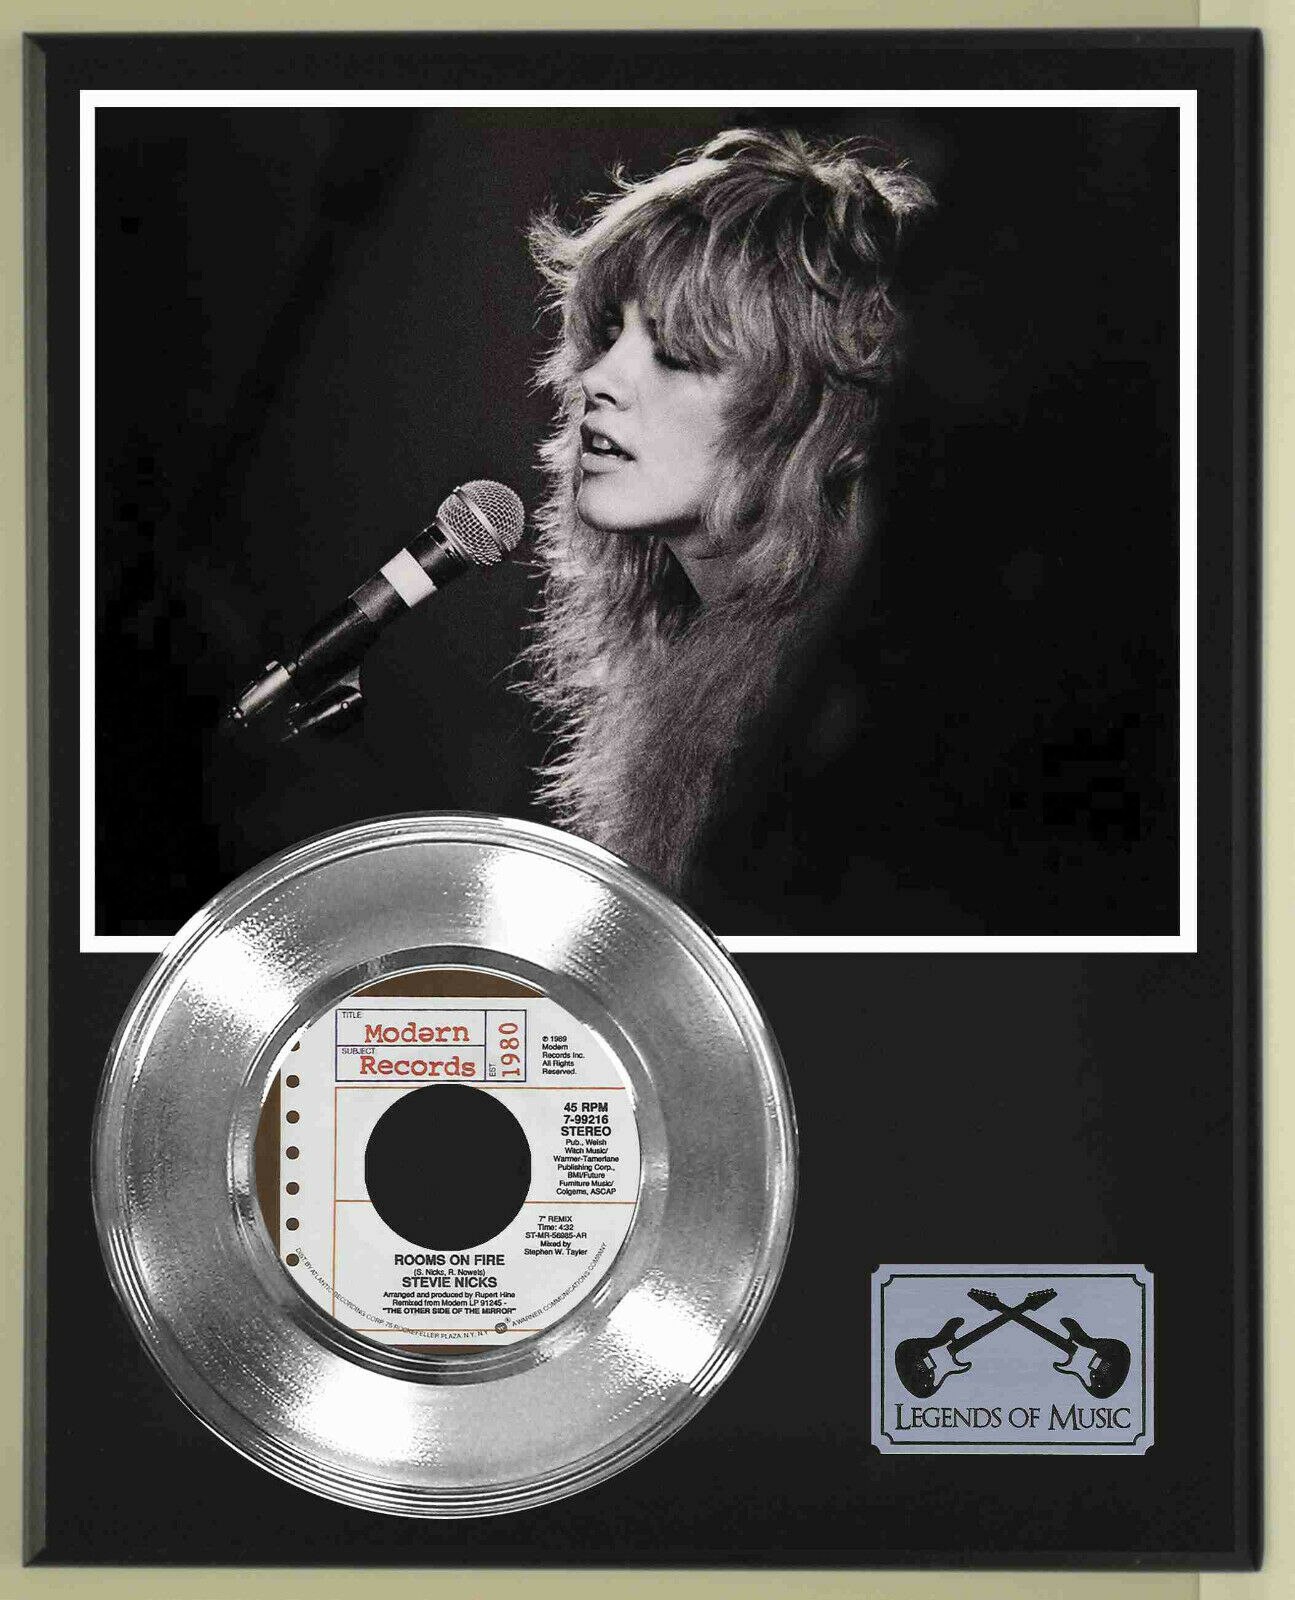 Stevie Nicks "rooms On Fire" Silver Record Display Wood Plaque